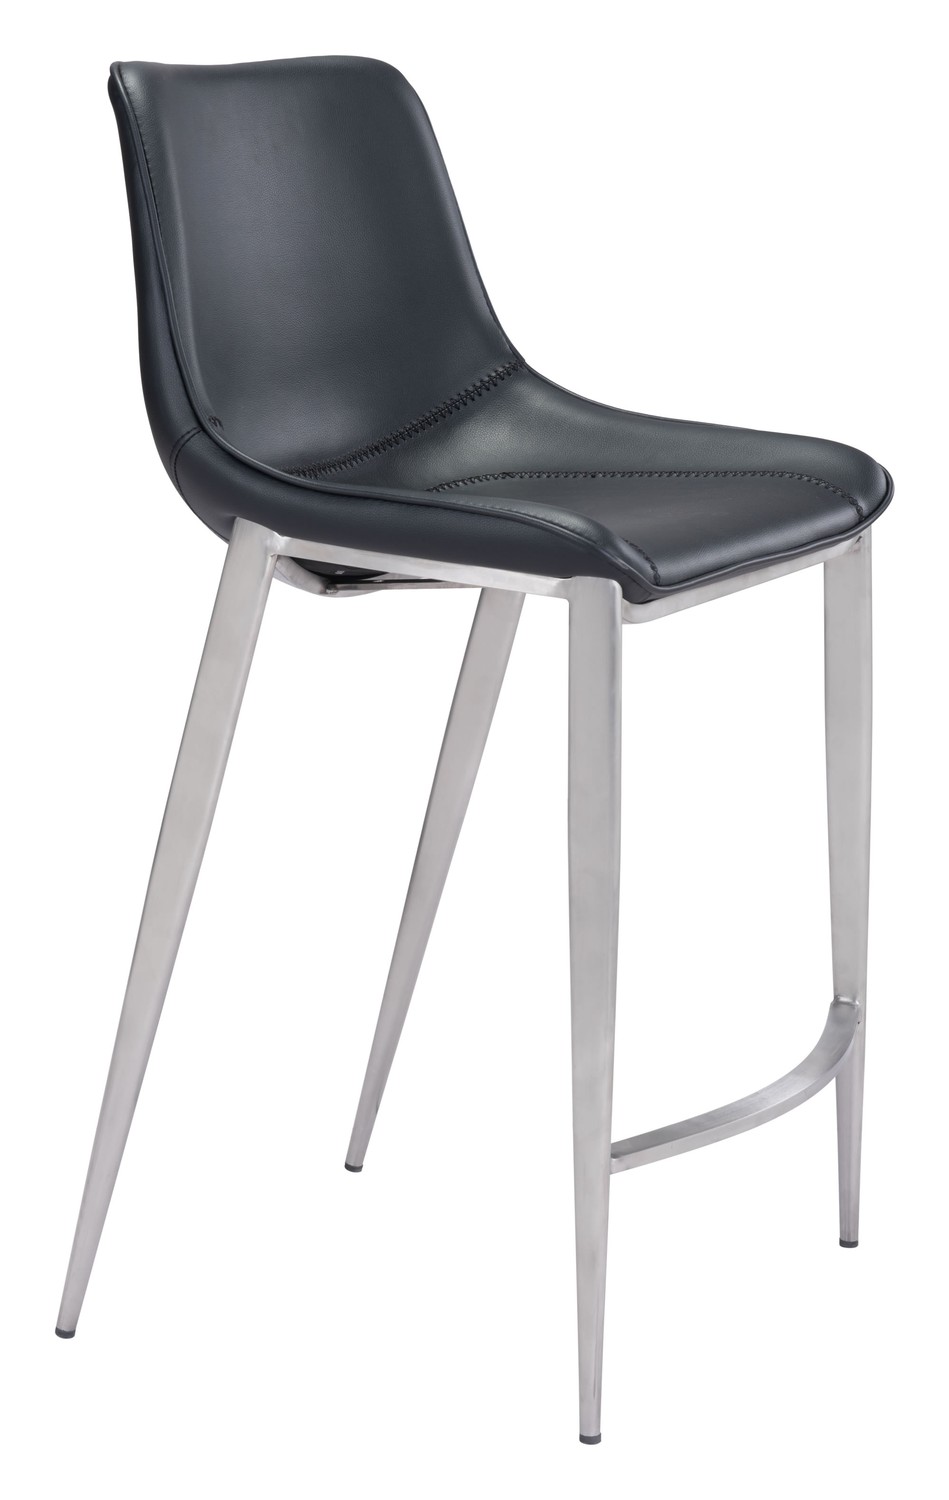 20.7" x 21.7" x 39.8" Black, Leatherette, Stainless Steel, Counter Chair - Set of 2